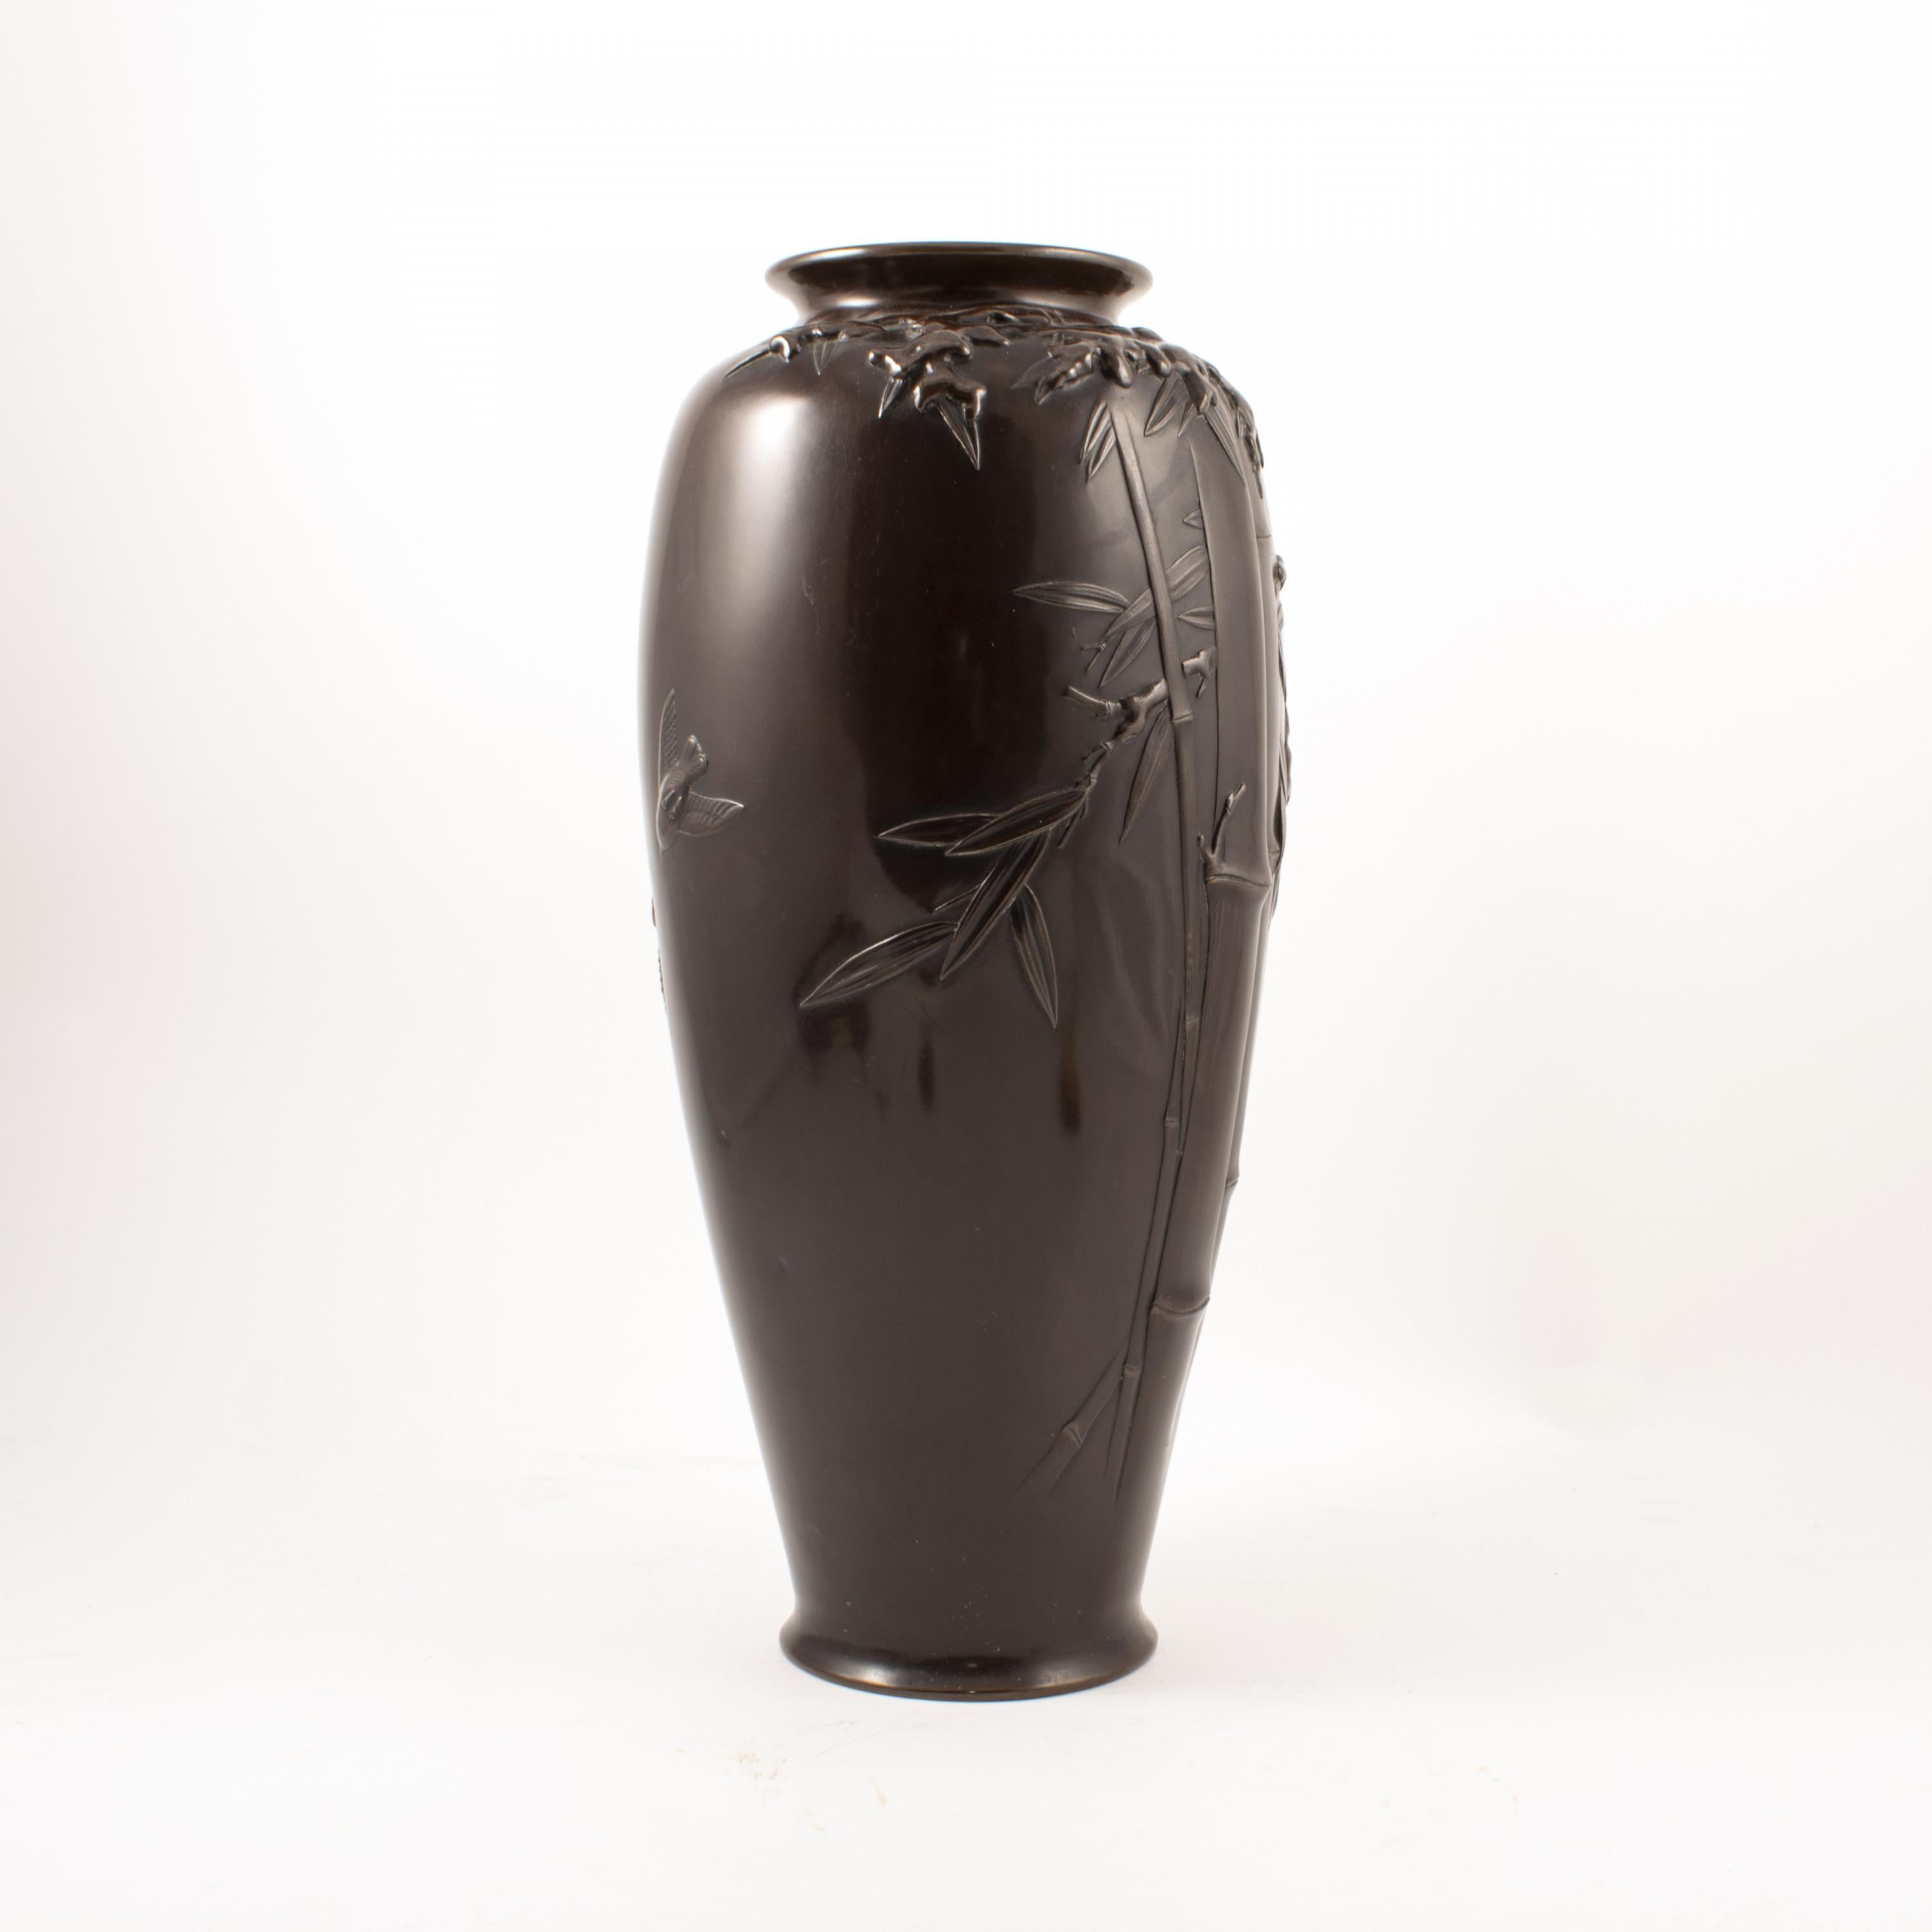 Japanese dark patinated bronze vase. Embossed with bamboo and bird’s motifs.
Late Meiji period, circa 1900.
Base has makers mark / signature.